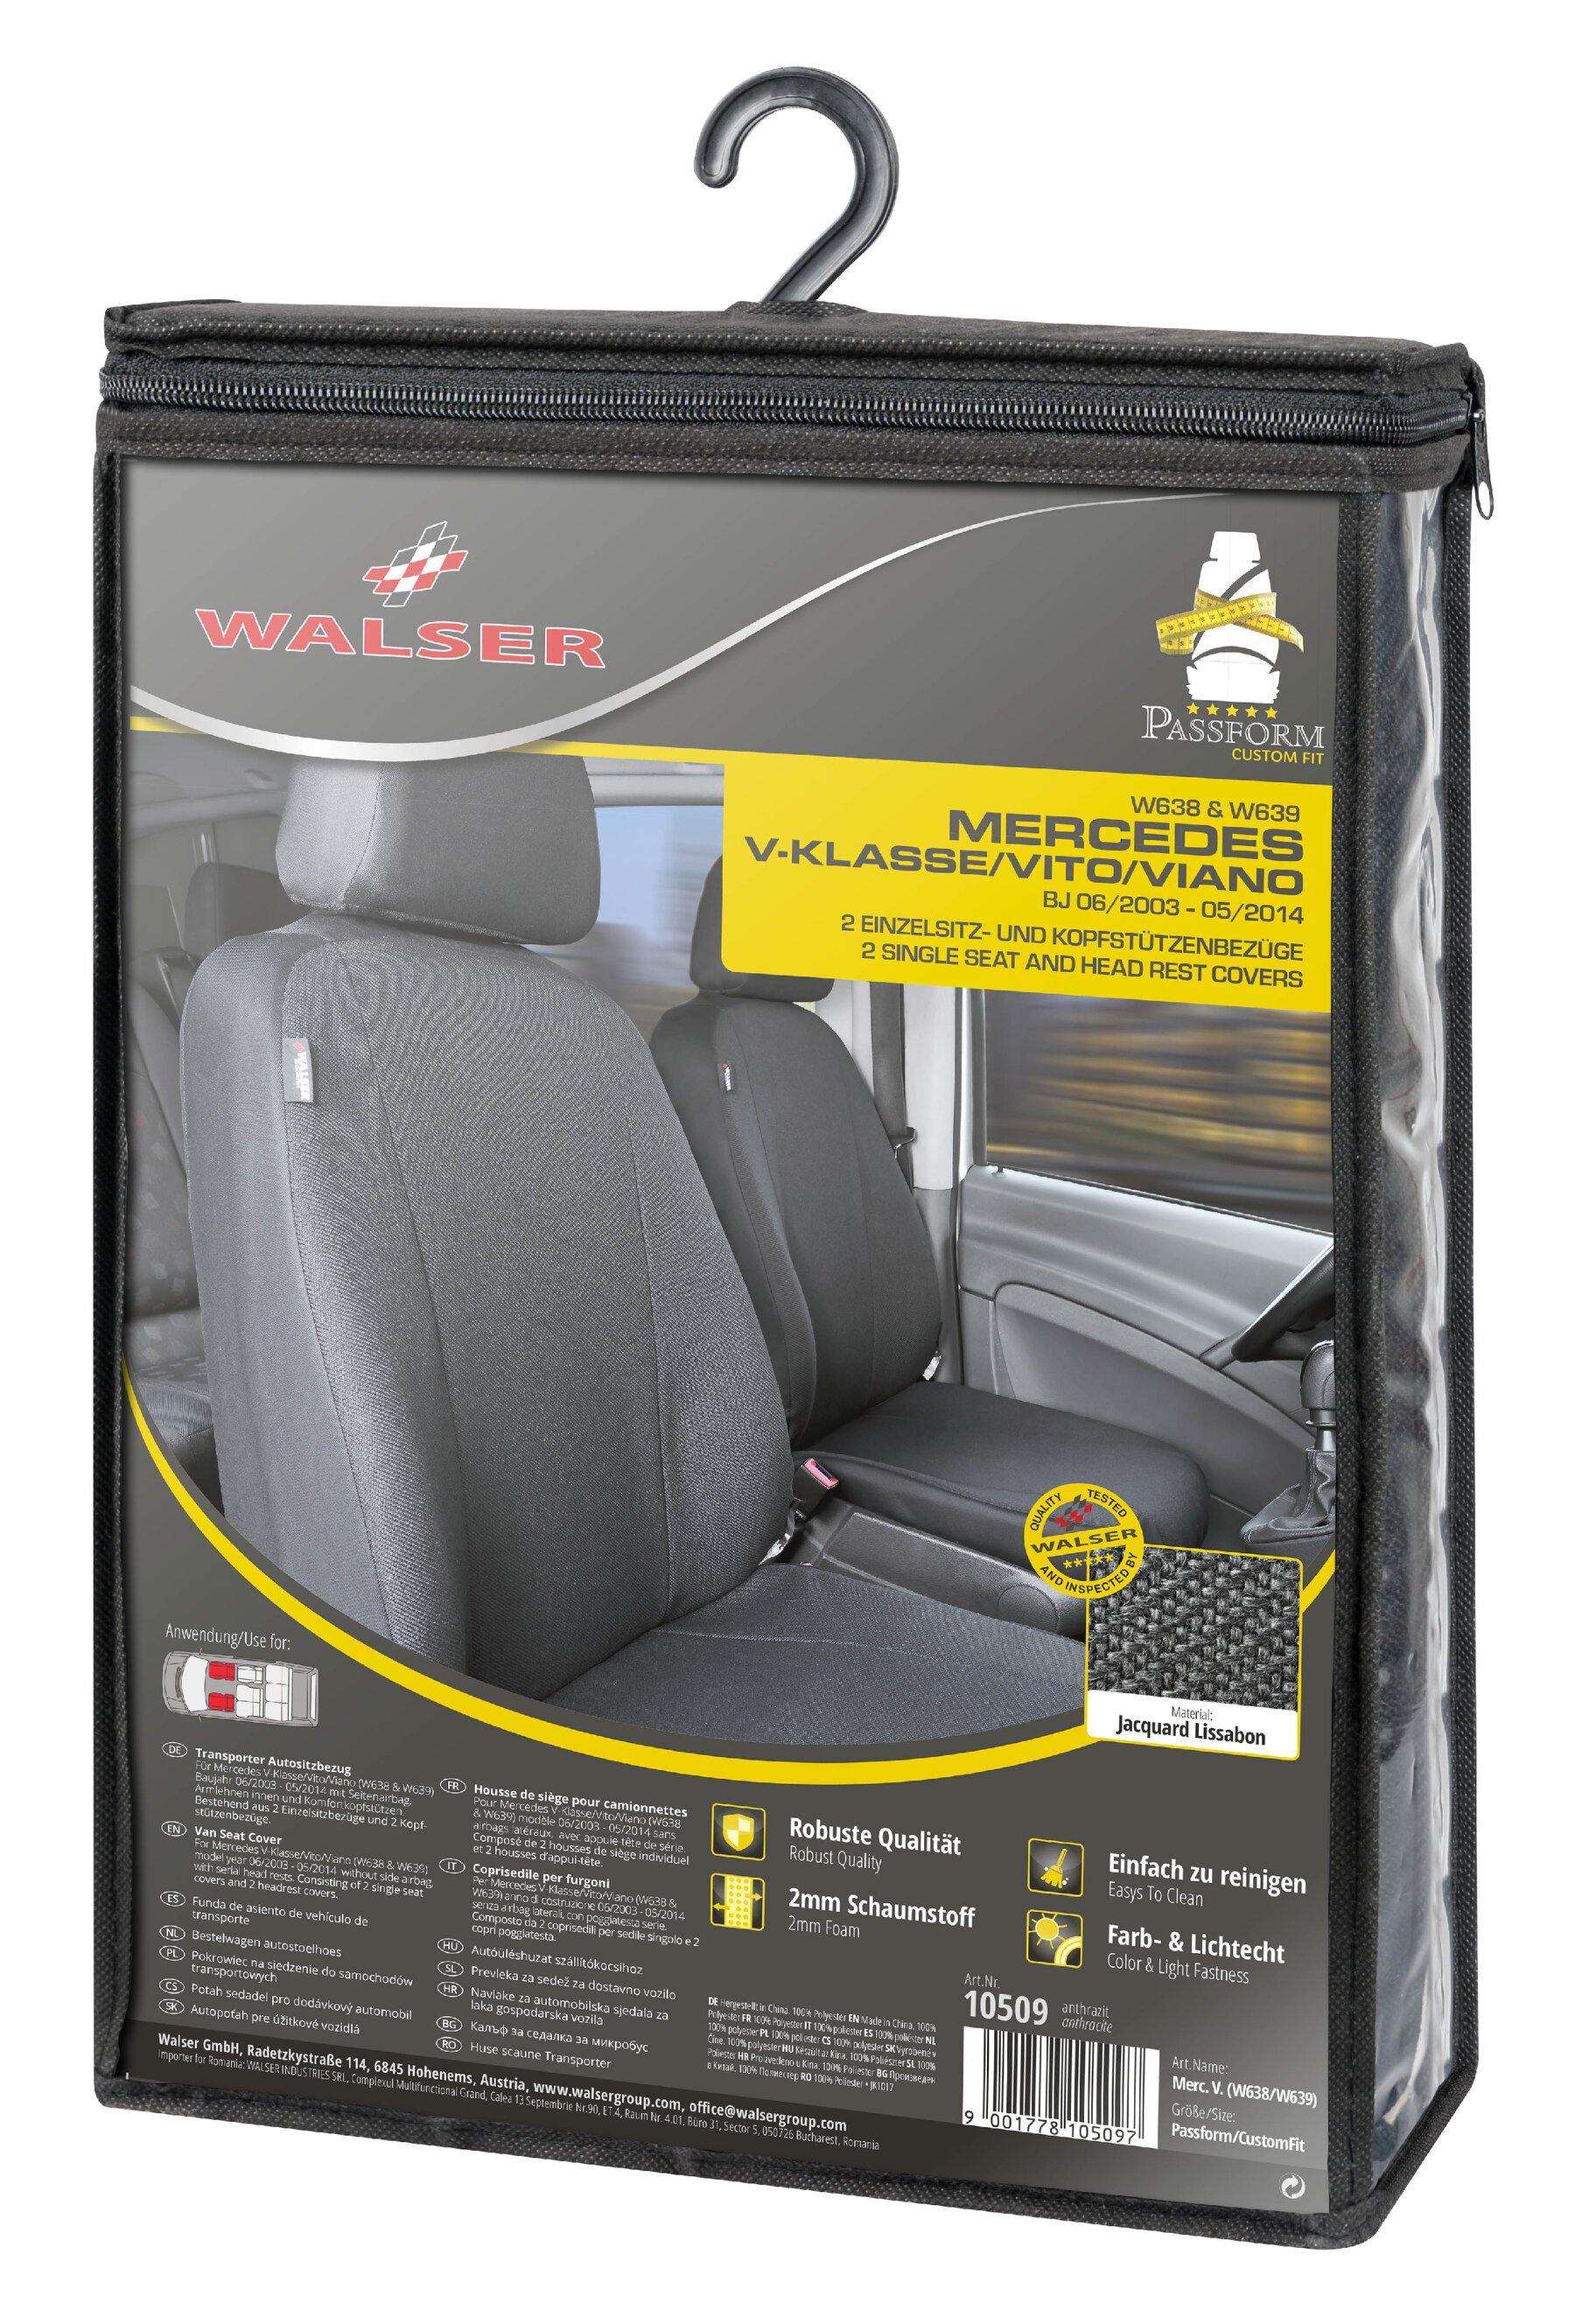 Seat cover made of fabric for Mercedes Vito/Viano, 2 single seat covers